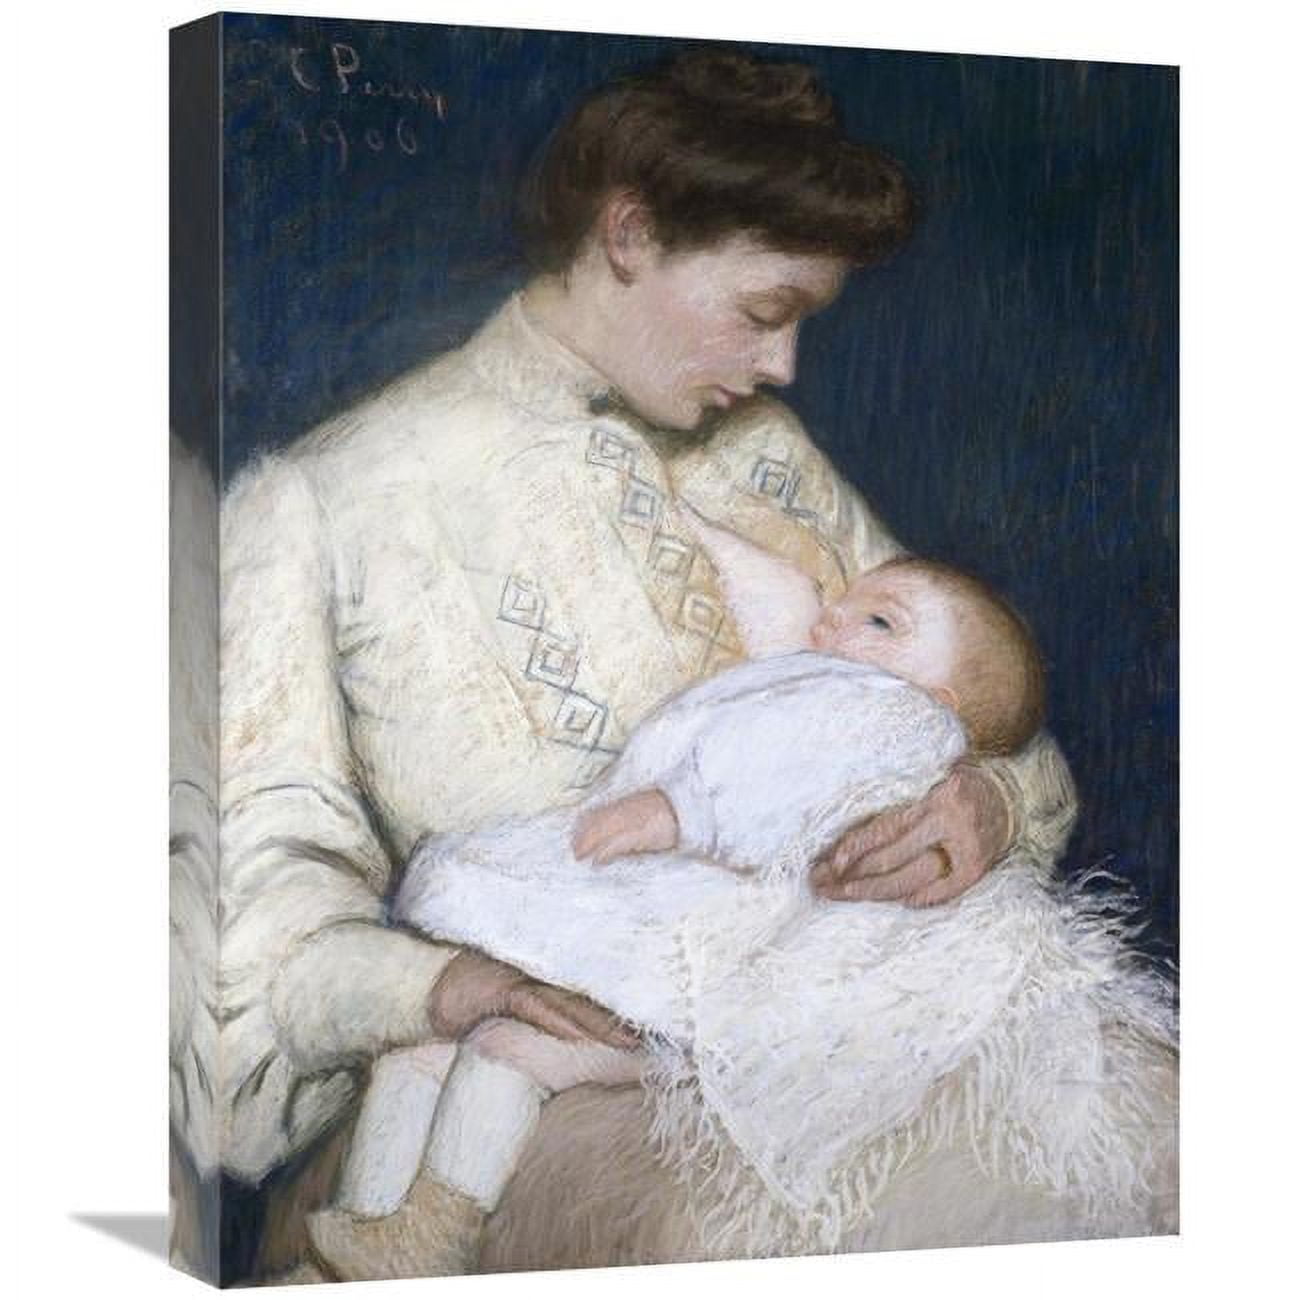 22 in. Nursing the Baby Art Print - Lilla Cabot Perry -  JensenDistributionServices, MI1274266